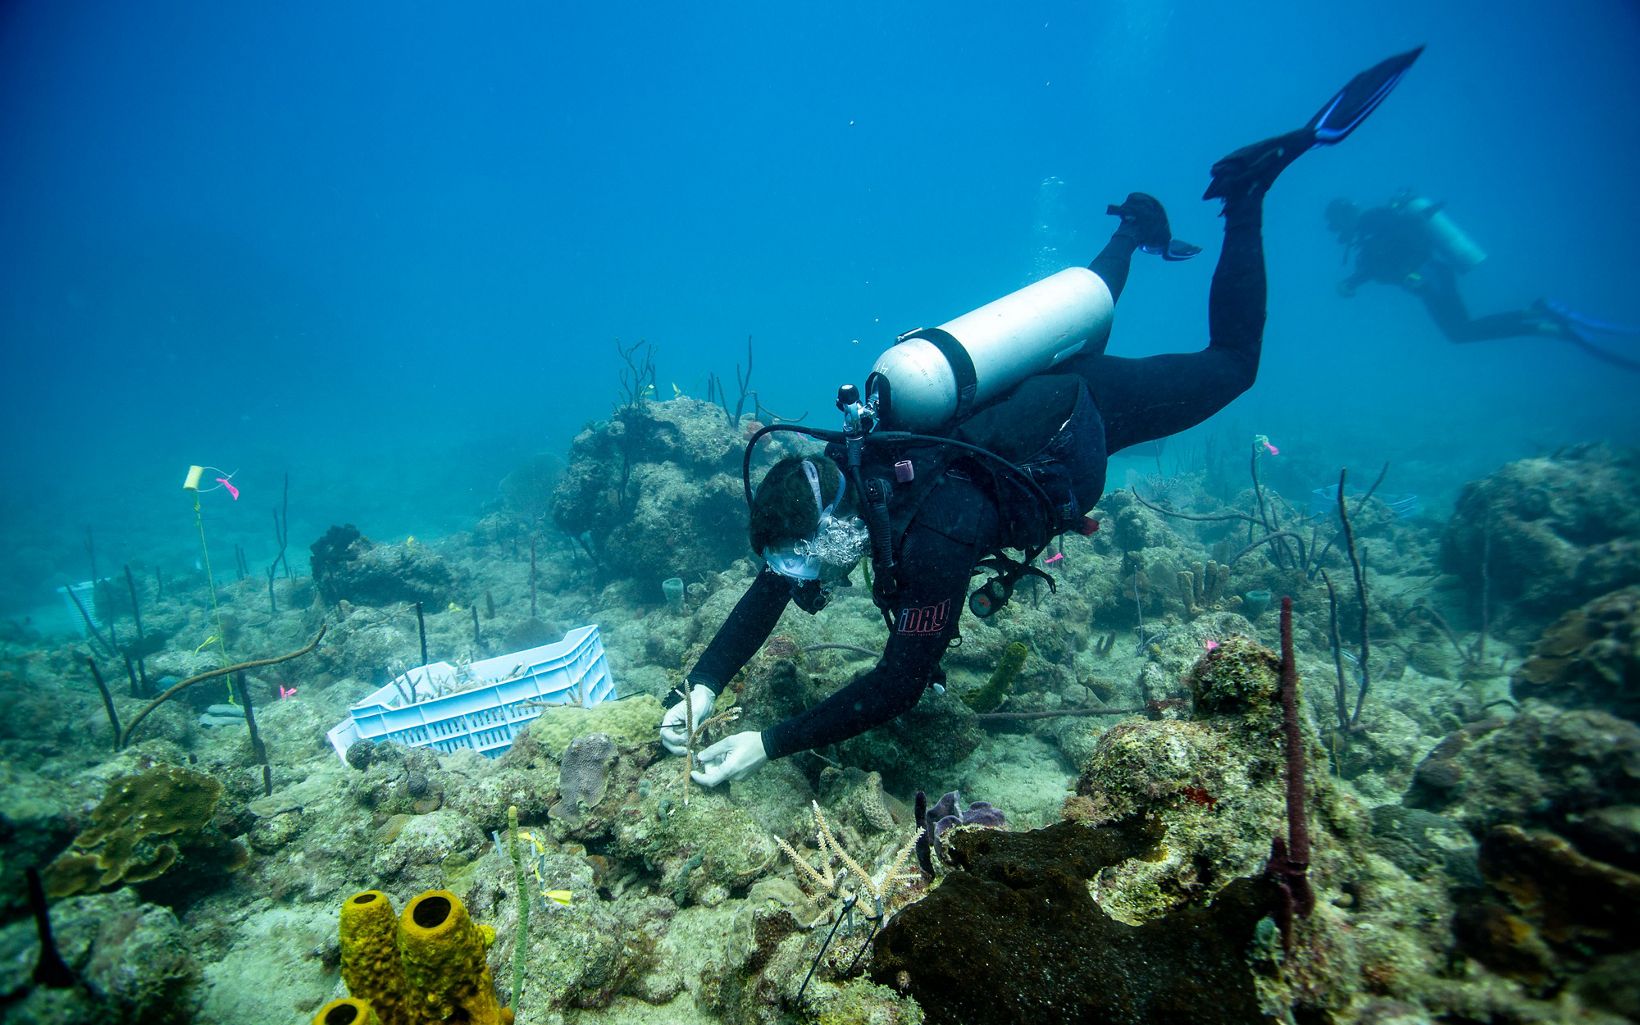 A diver uses a zip tie to attach a coral fragment to an unhealthy reef.